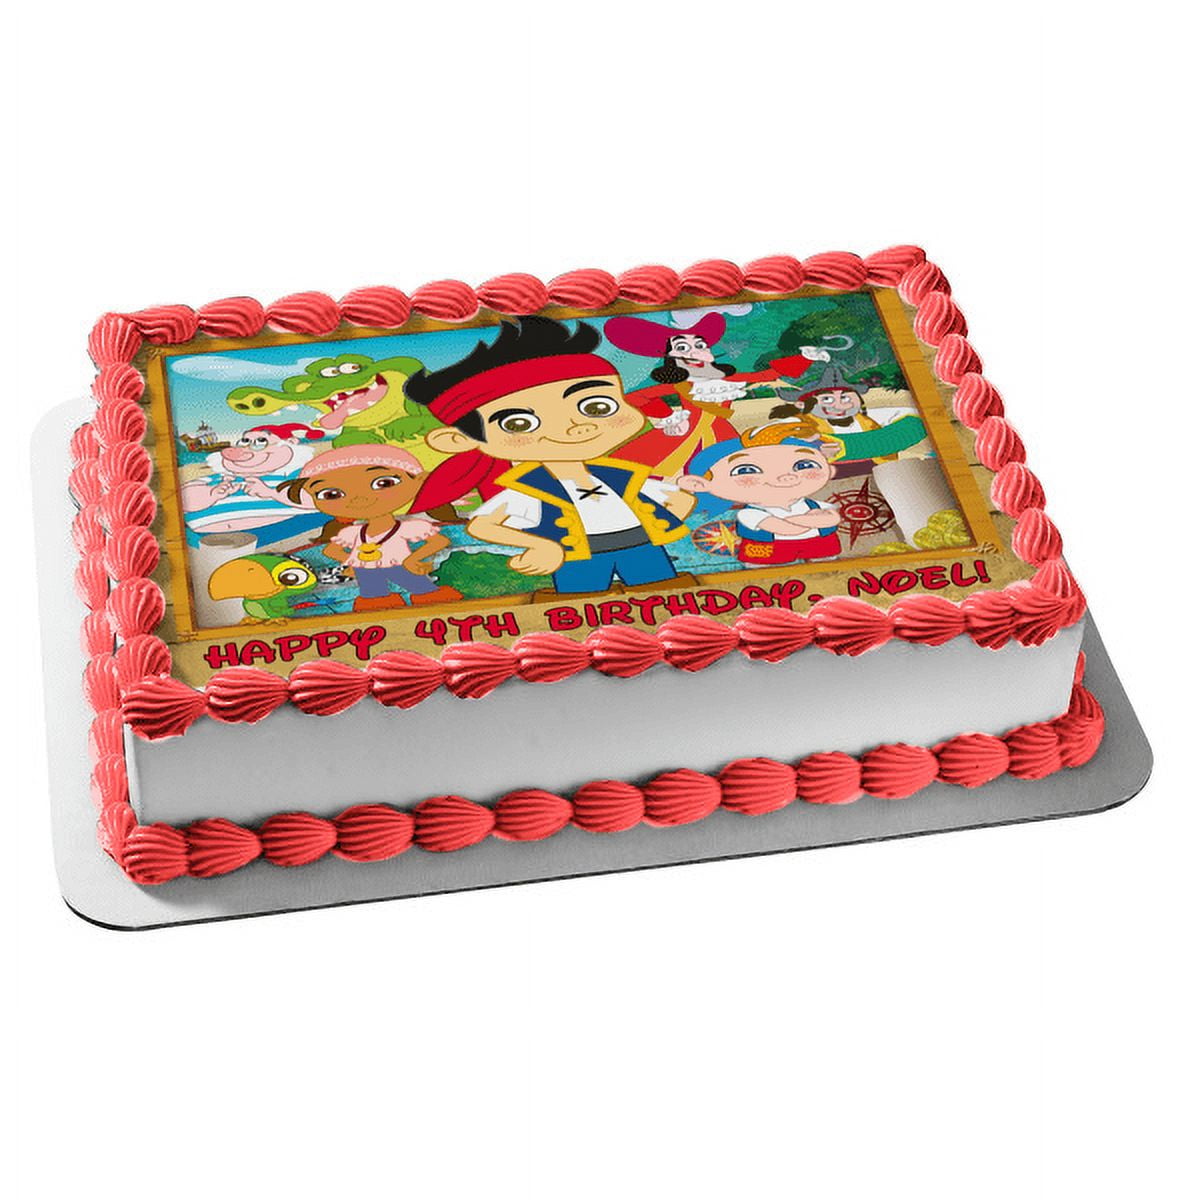 Disney Jake and the Land Pirates Izzy Cubby Captain Hook Edible Cake Topper Image Walmart.com